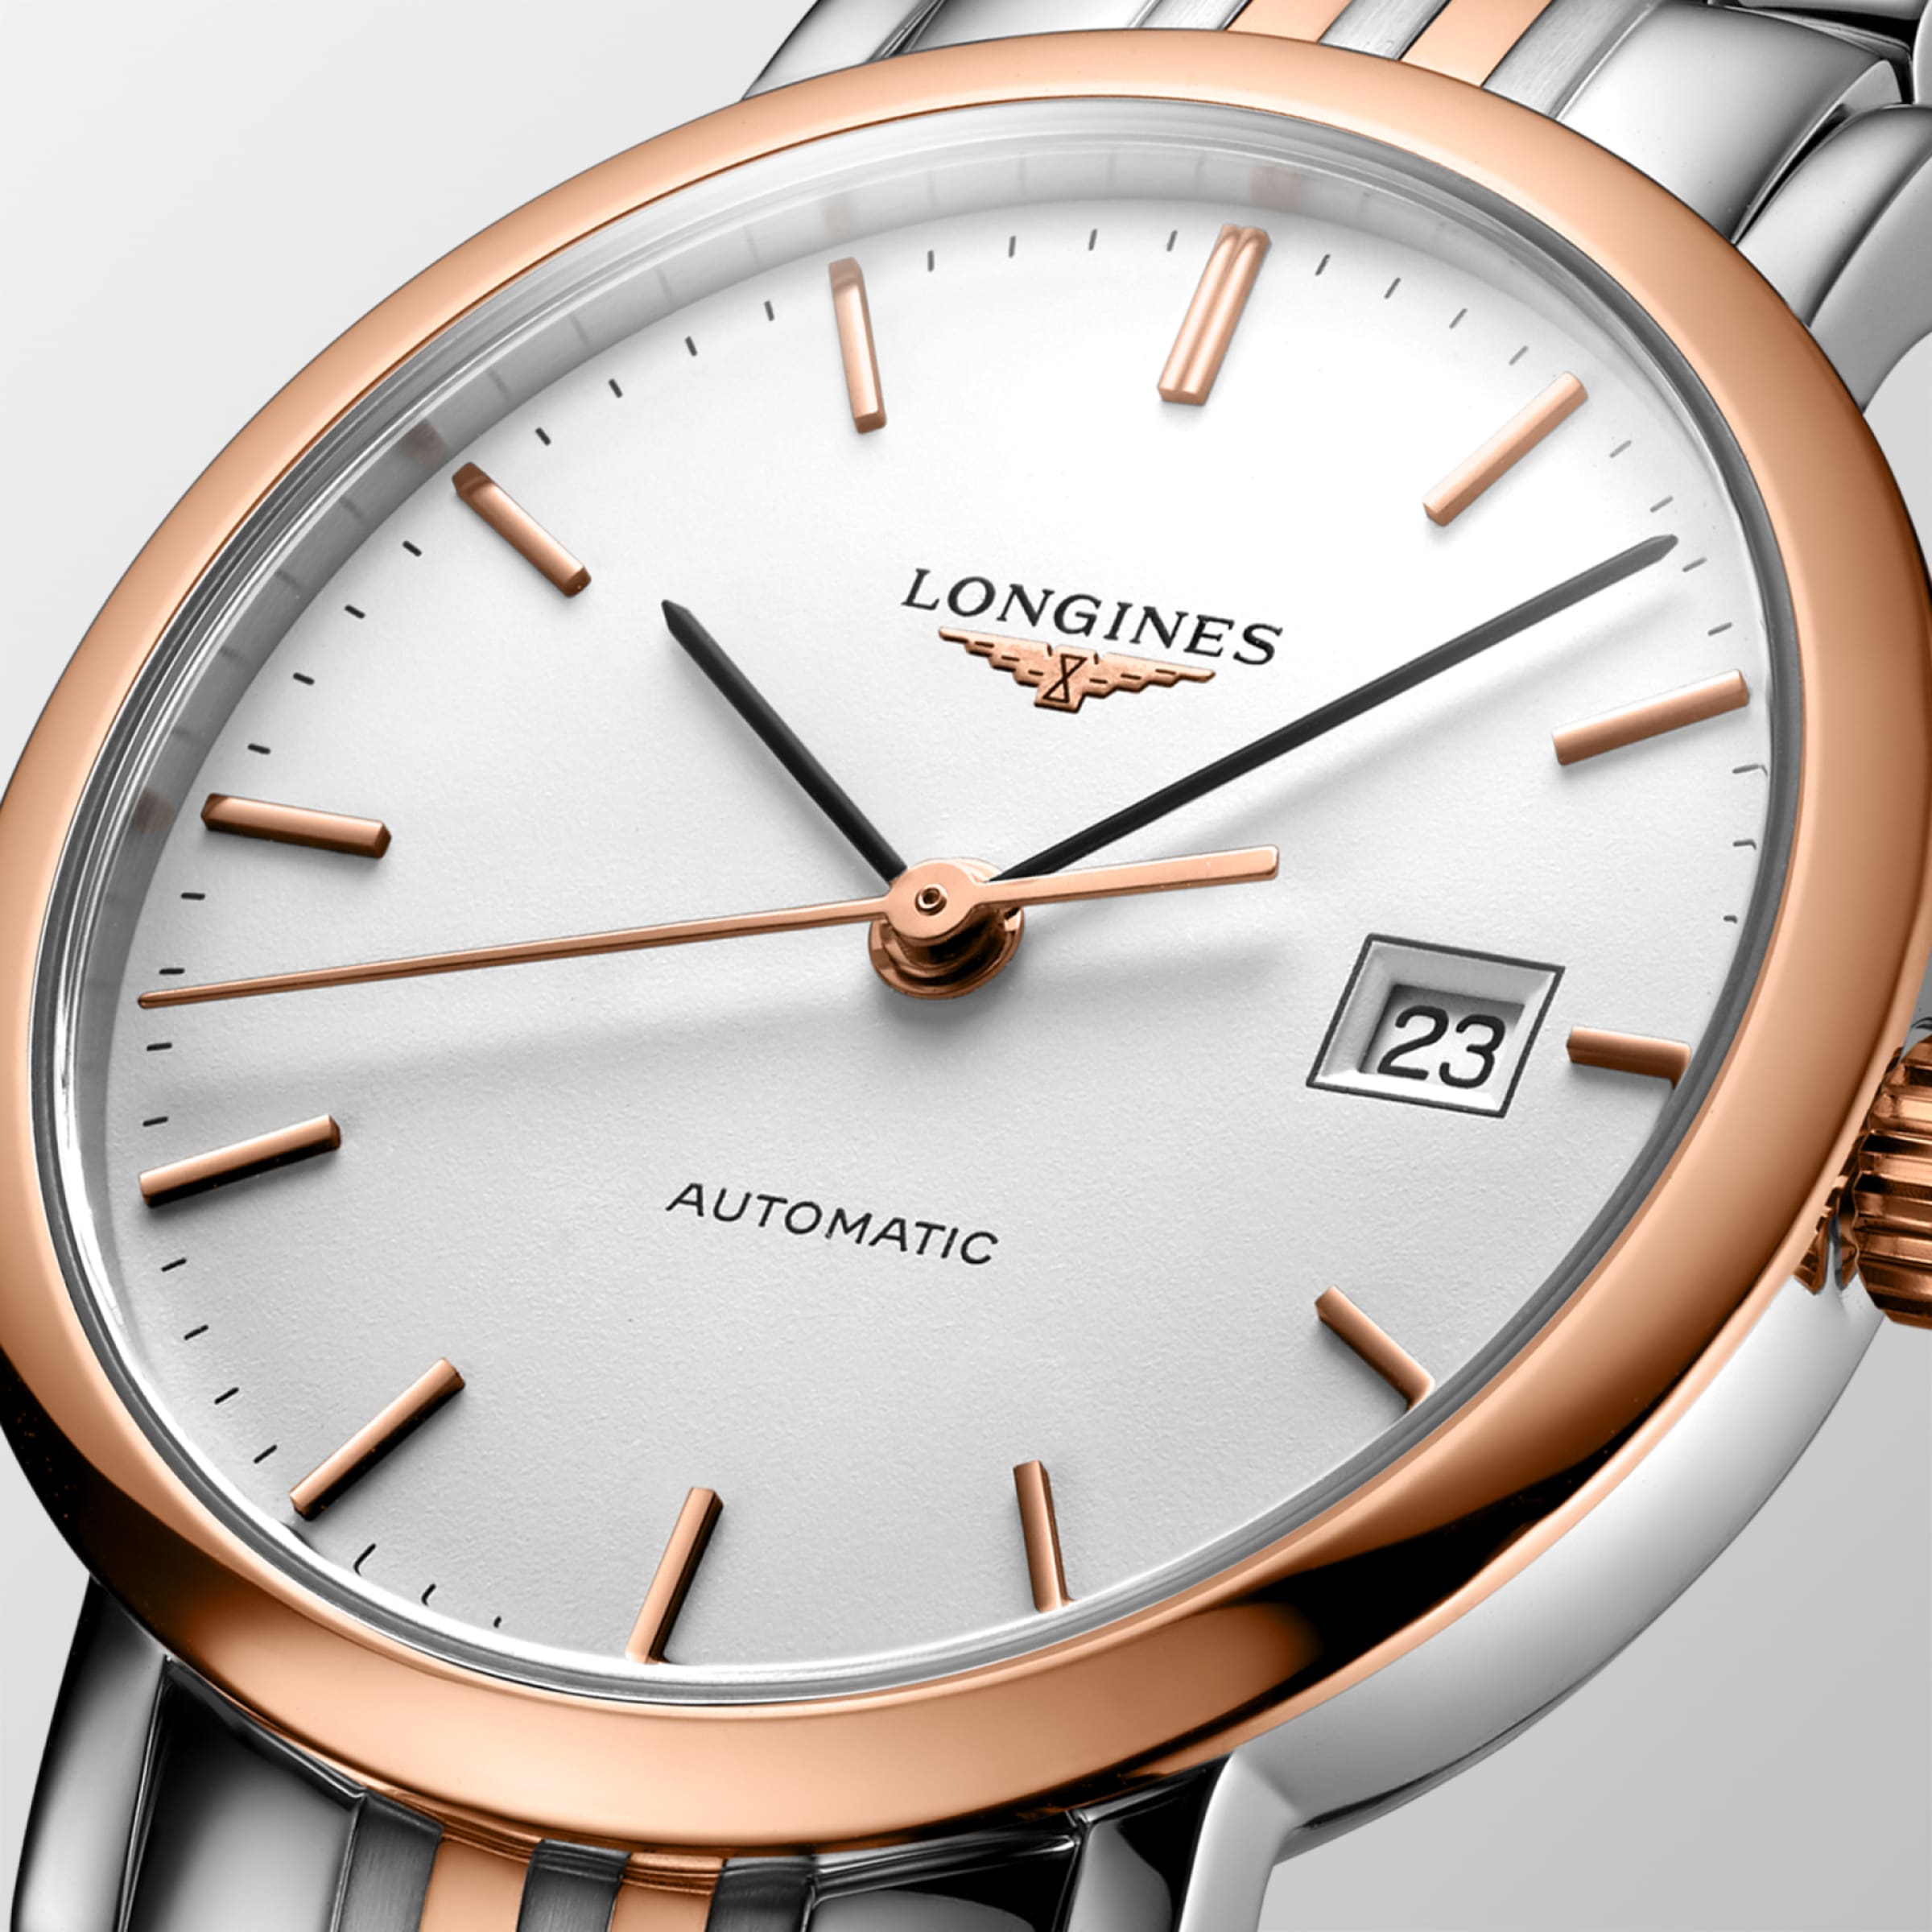 Longines ELEGANT COLLECTION Automatic Stainless steel and 18 karat pink gold cap 200 Watch - L4.310.5.12.7